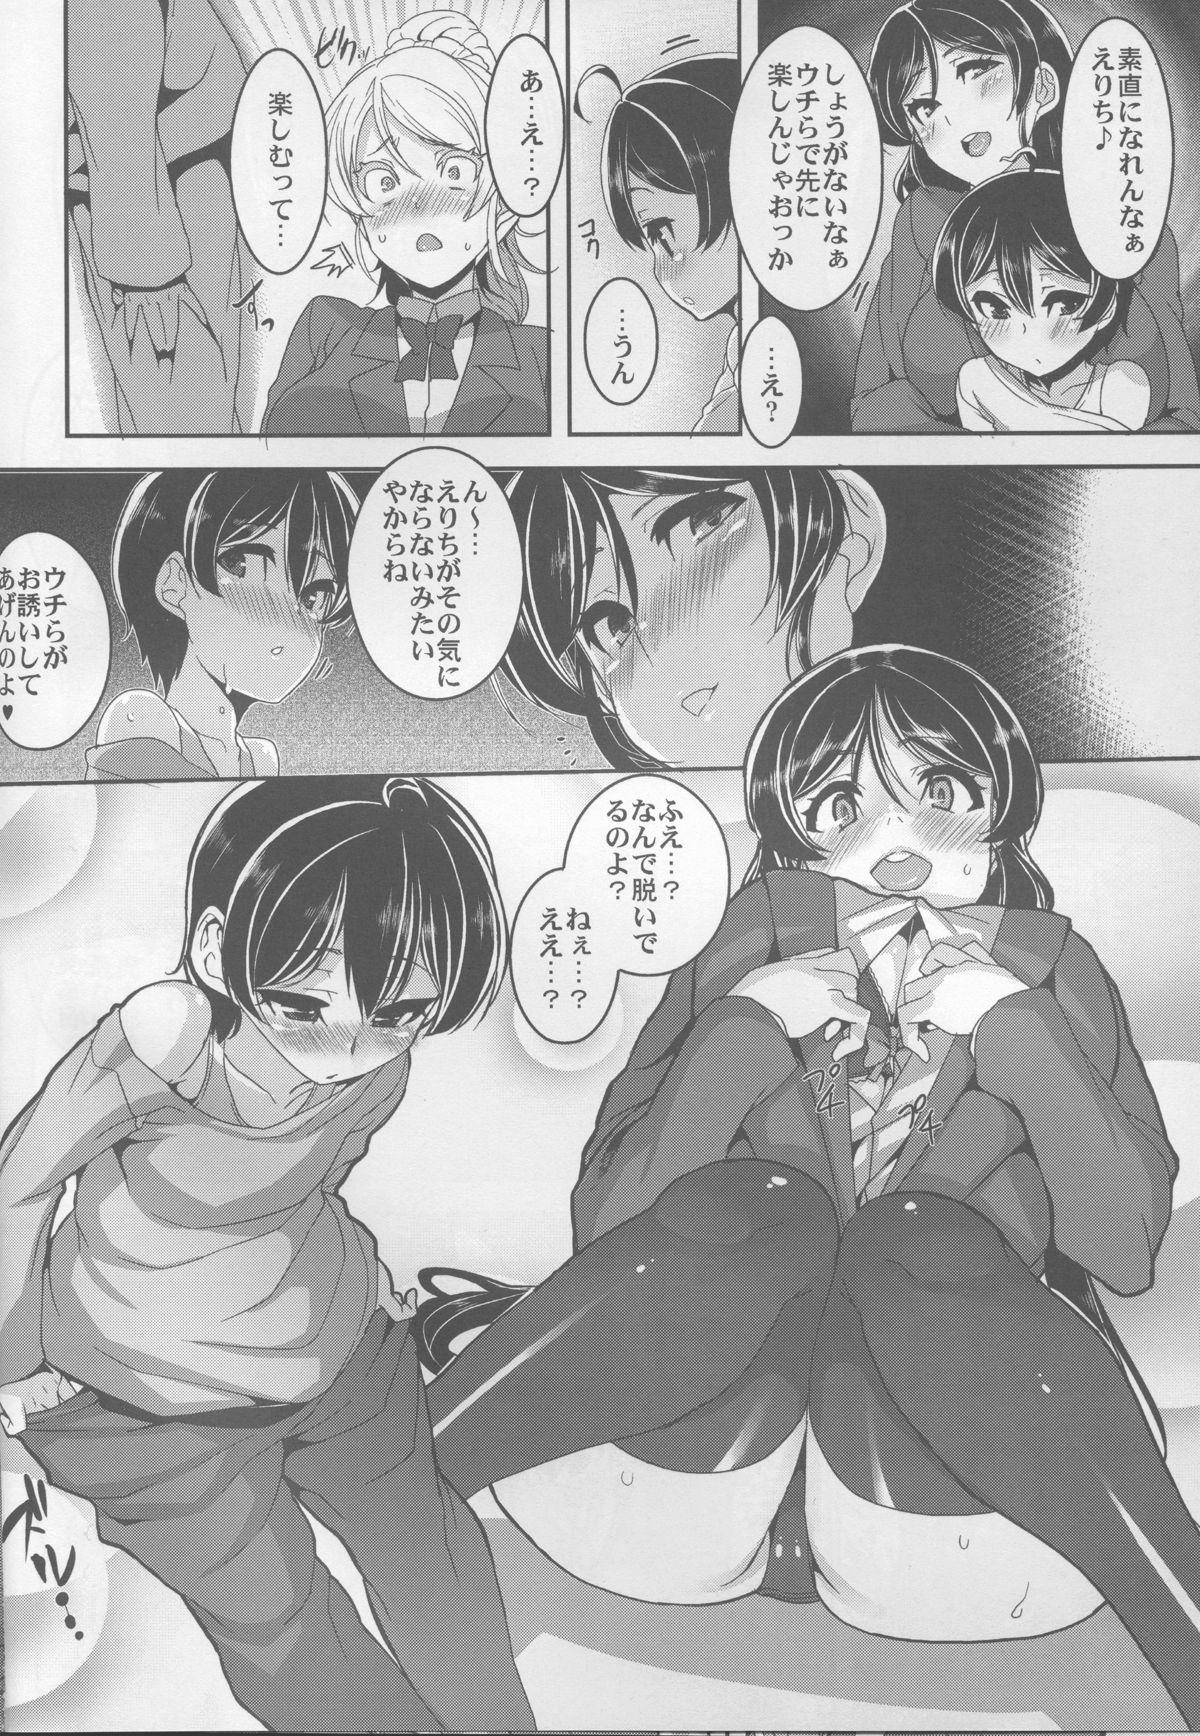 Long Oneechan to Issho - Love live Brunettes - Page 7